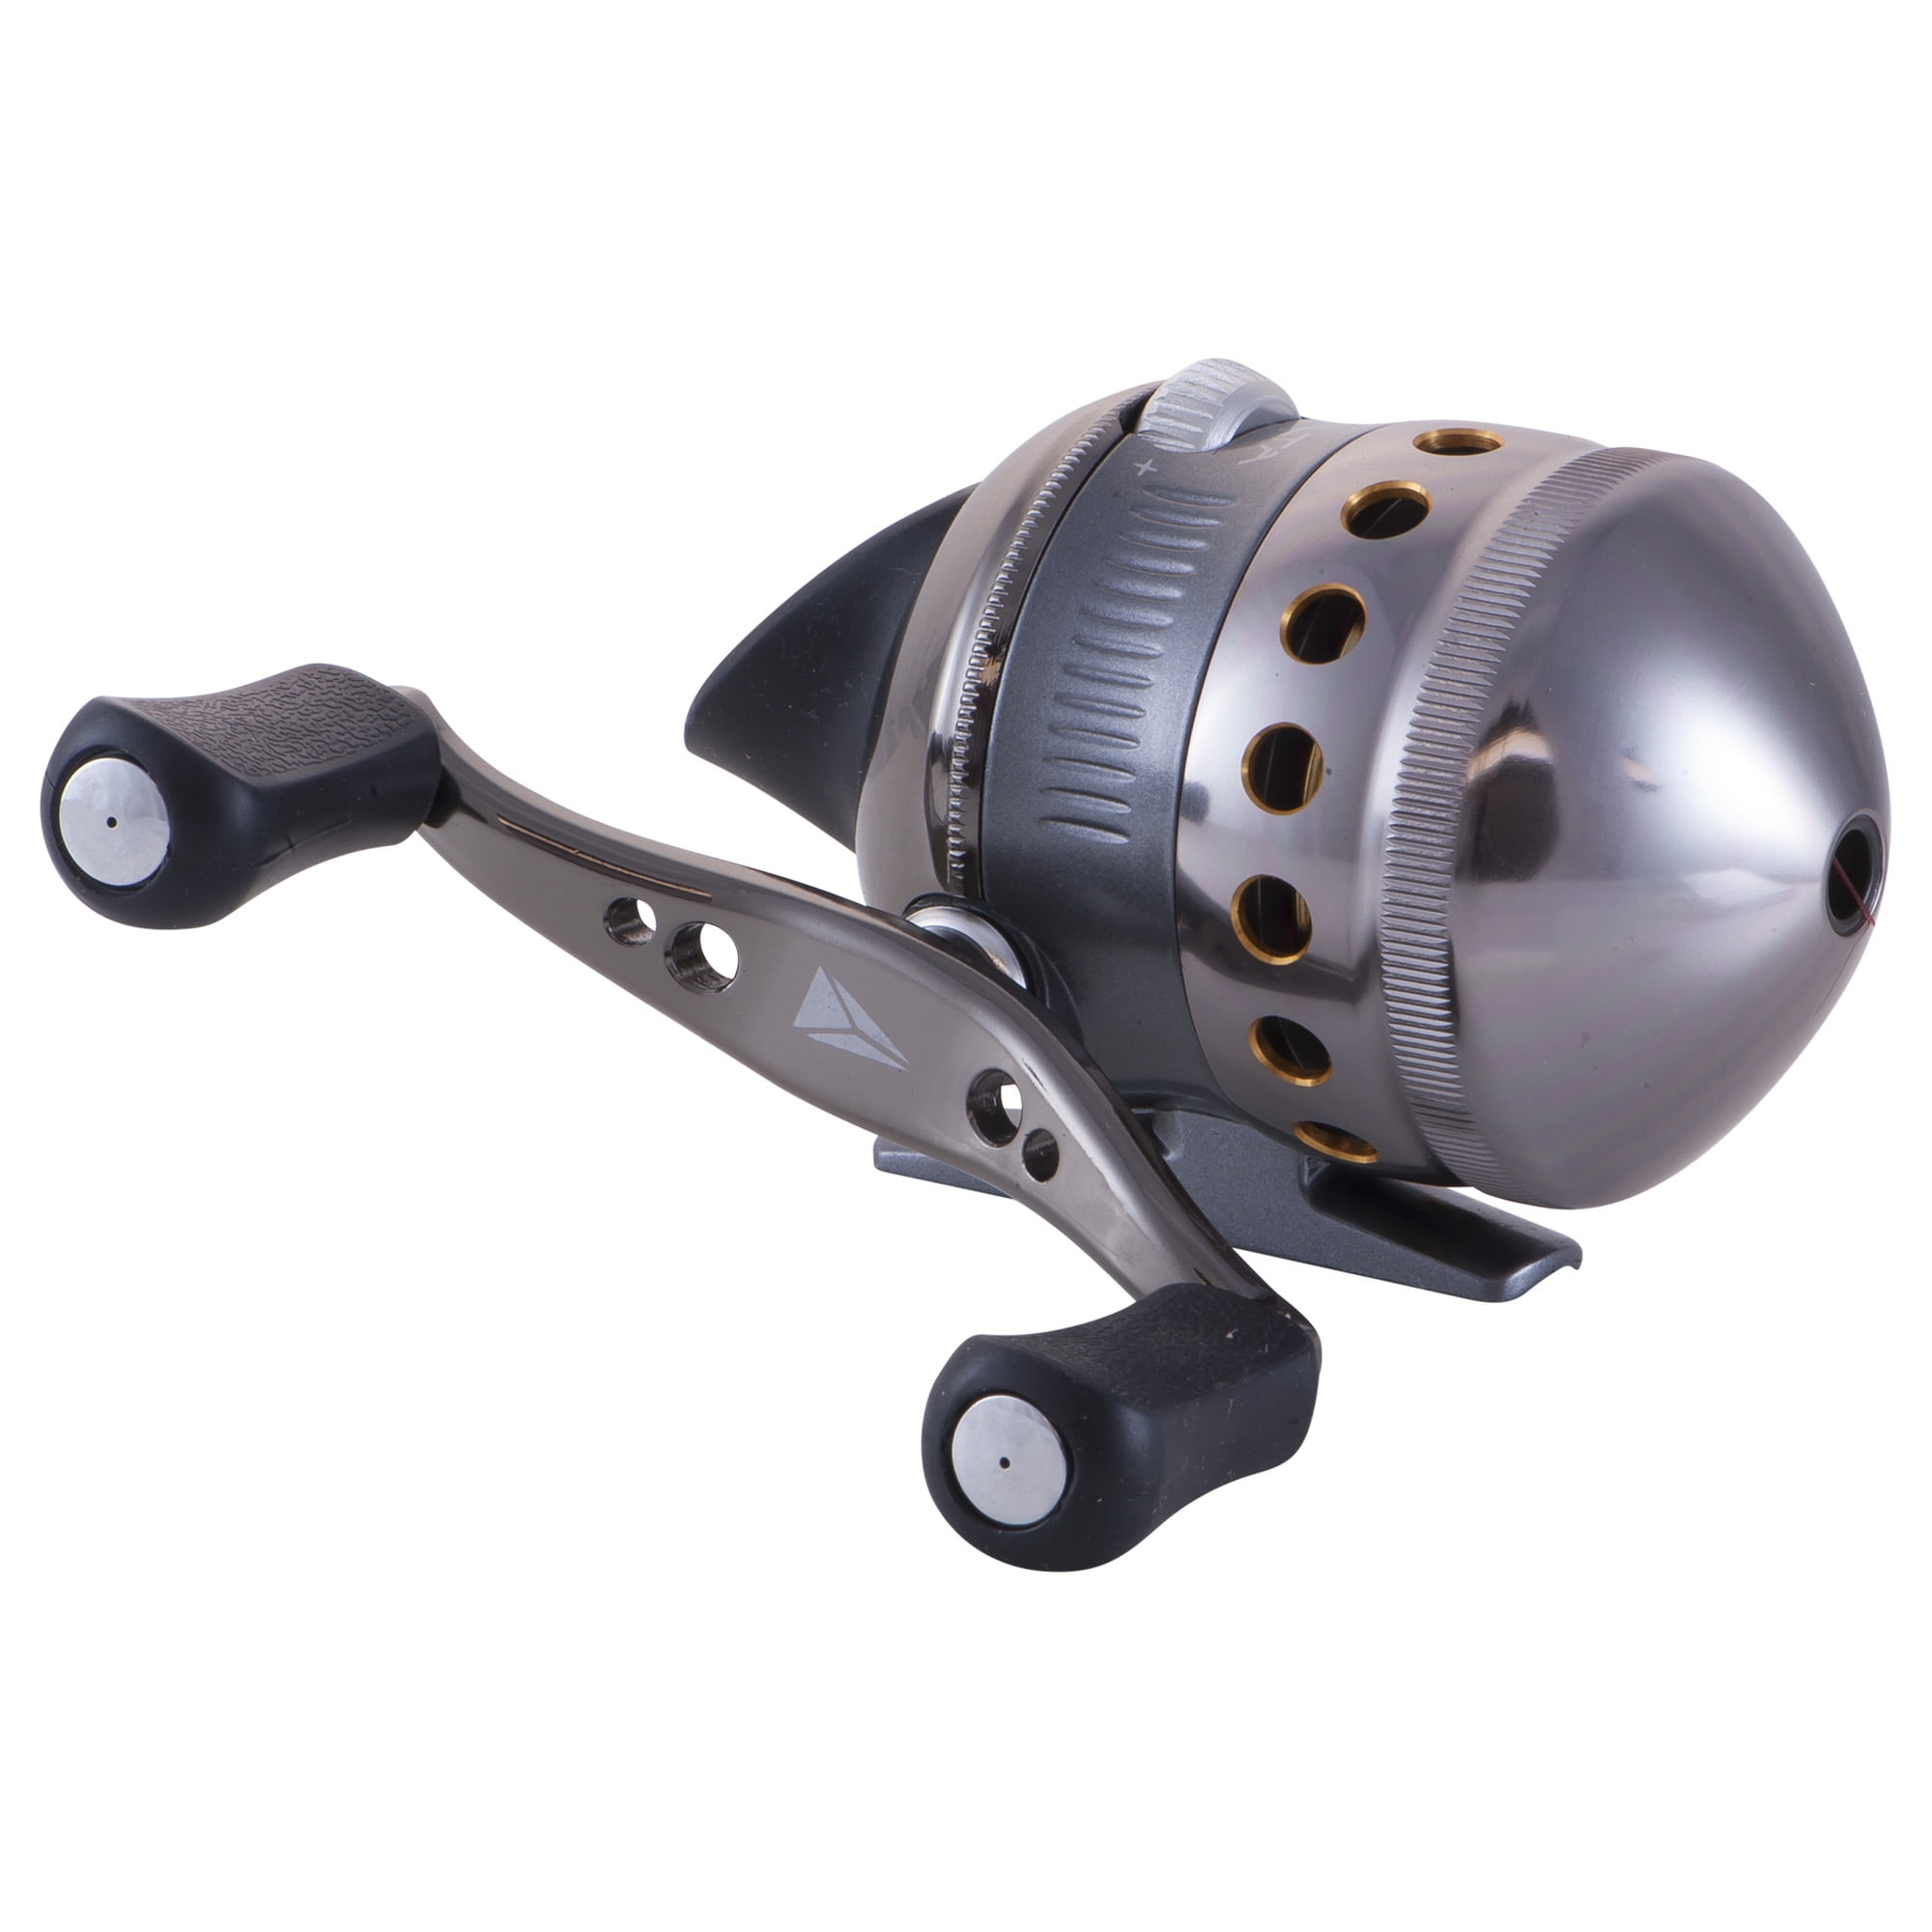 Zebco US76 Spincasting Reel Star Drag and 32 similar items